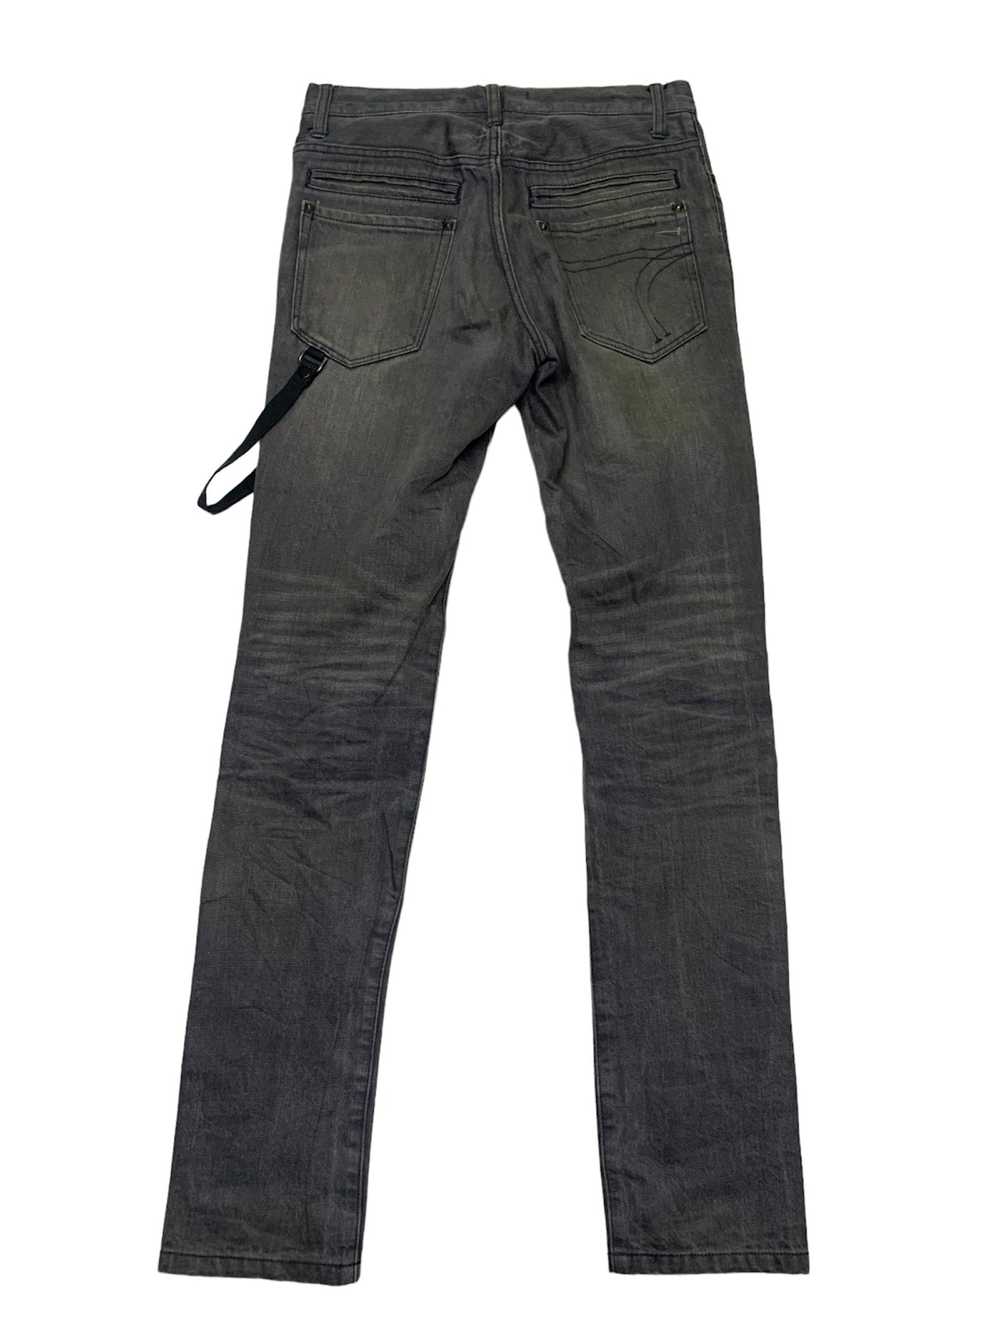 Issey Miyake × Tete Homme Tete homme skiny jeans - image 6